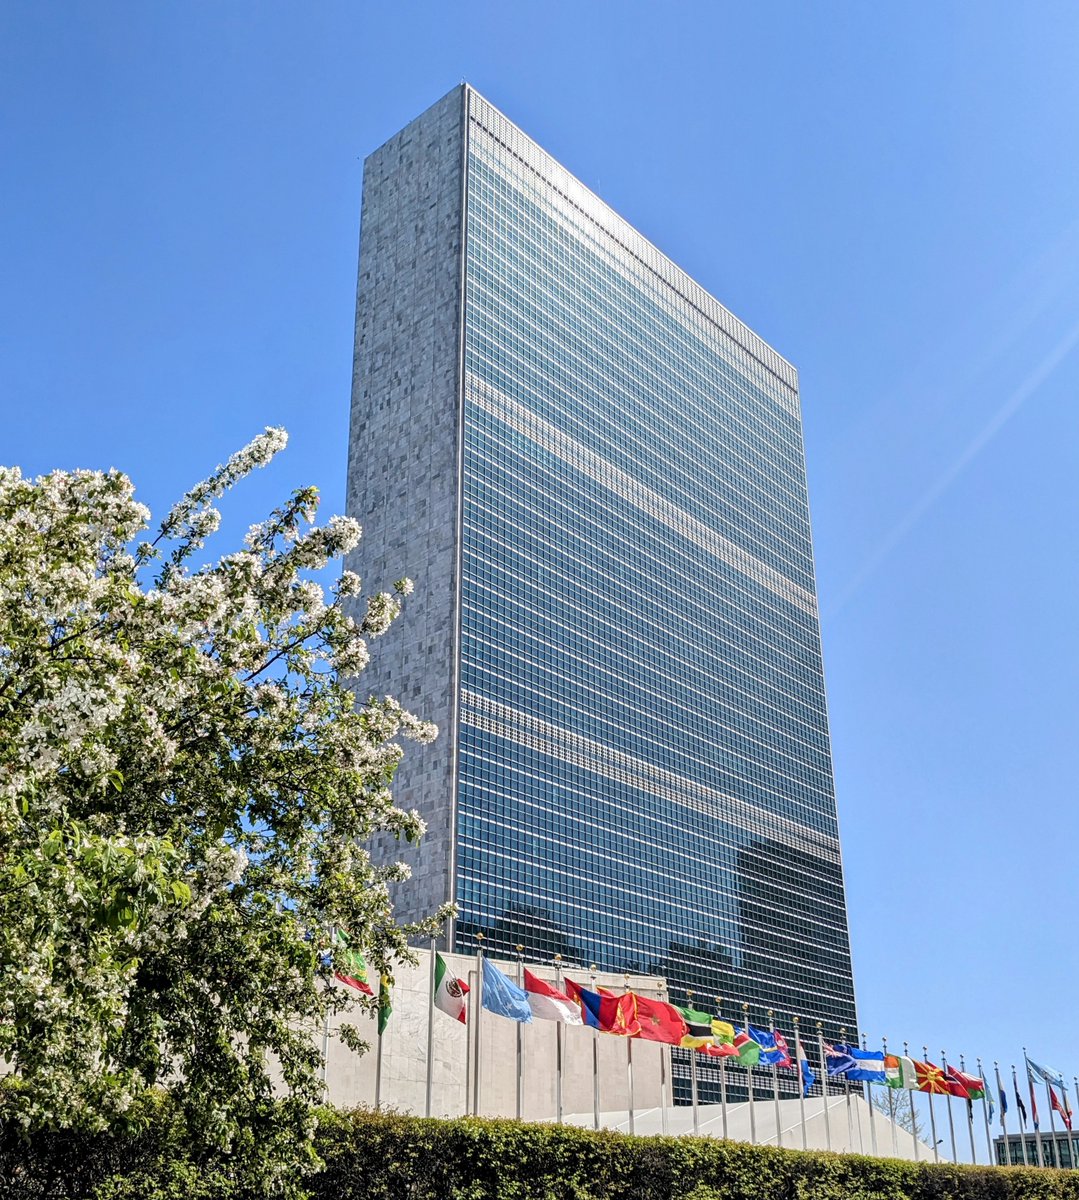 @UN #FfD4 should agree on a UN Framework Convention on International Tax Cooperation to address tax abuse by MNCs, tax evasion and other illicit financial flows and support the countries + peoples' Right to Development  #UNTaxConvention #TaxJustice #Fin4Dev #GlobalGoals